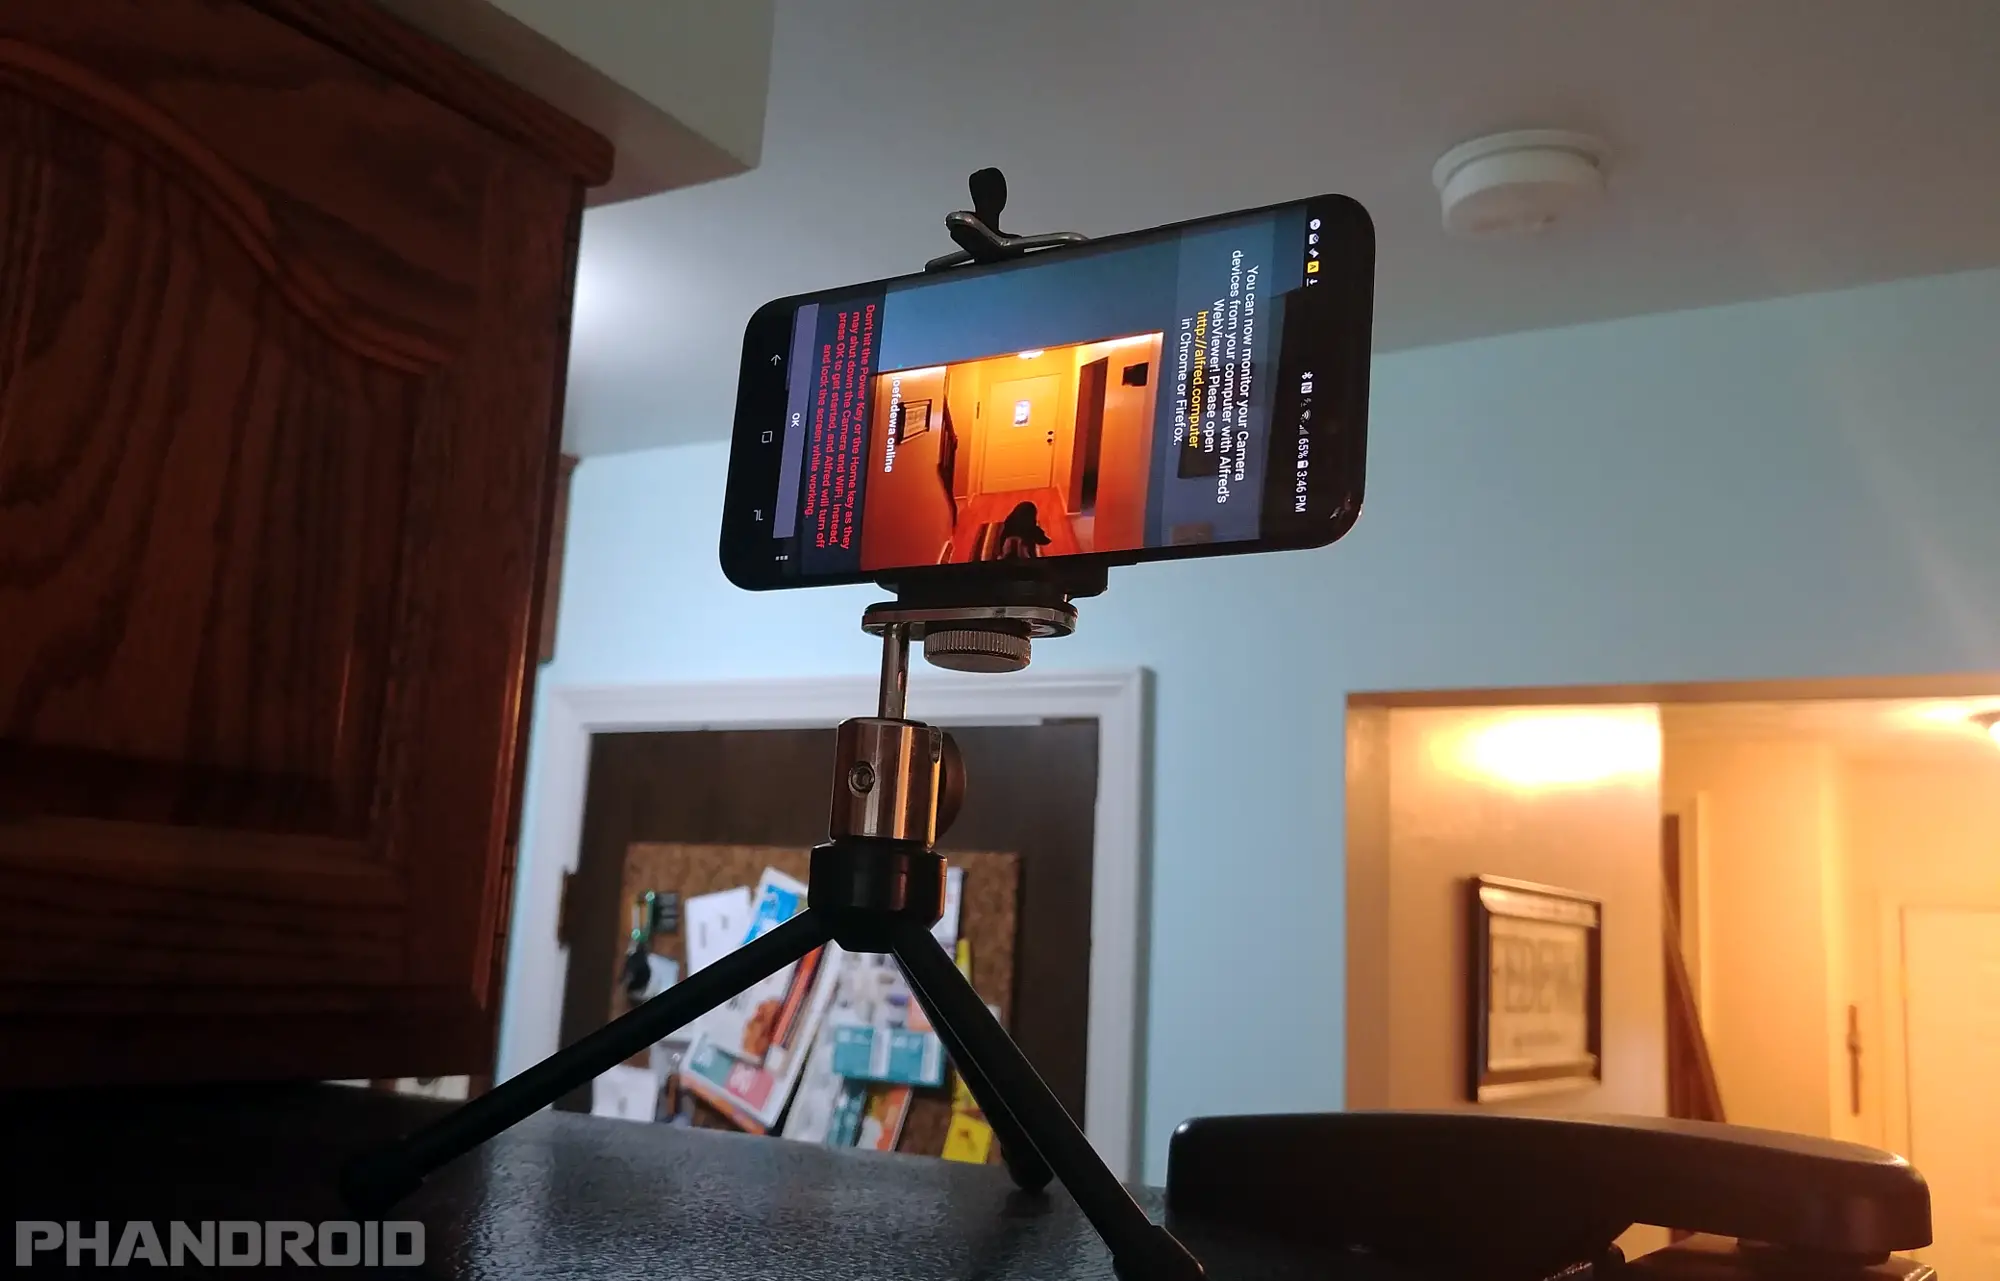 How To Turn Your Old Android Phone Into A Security Camera